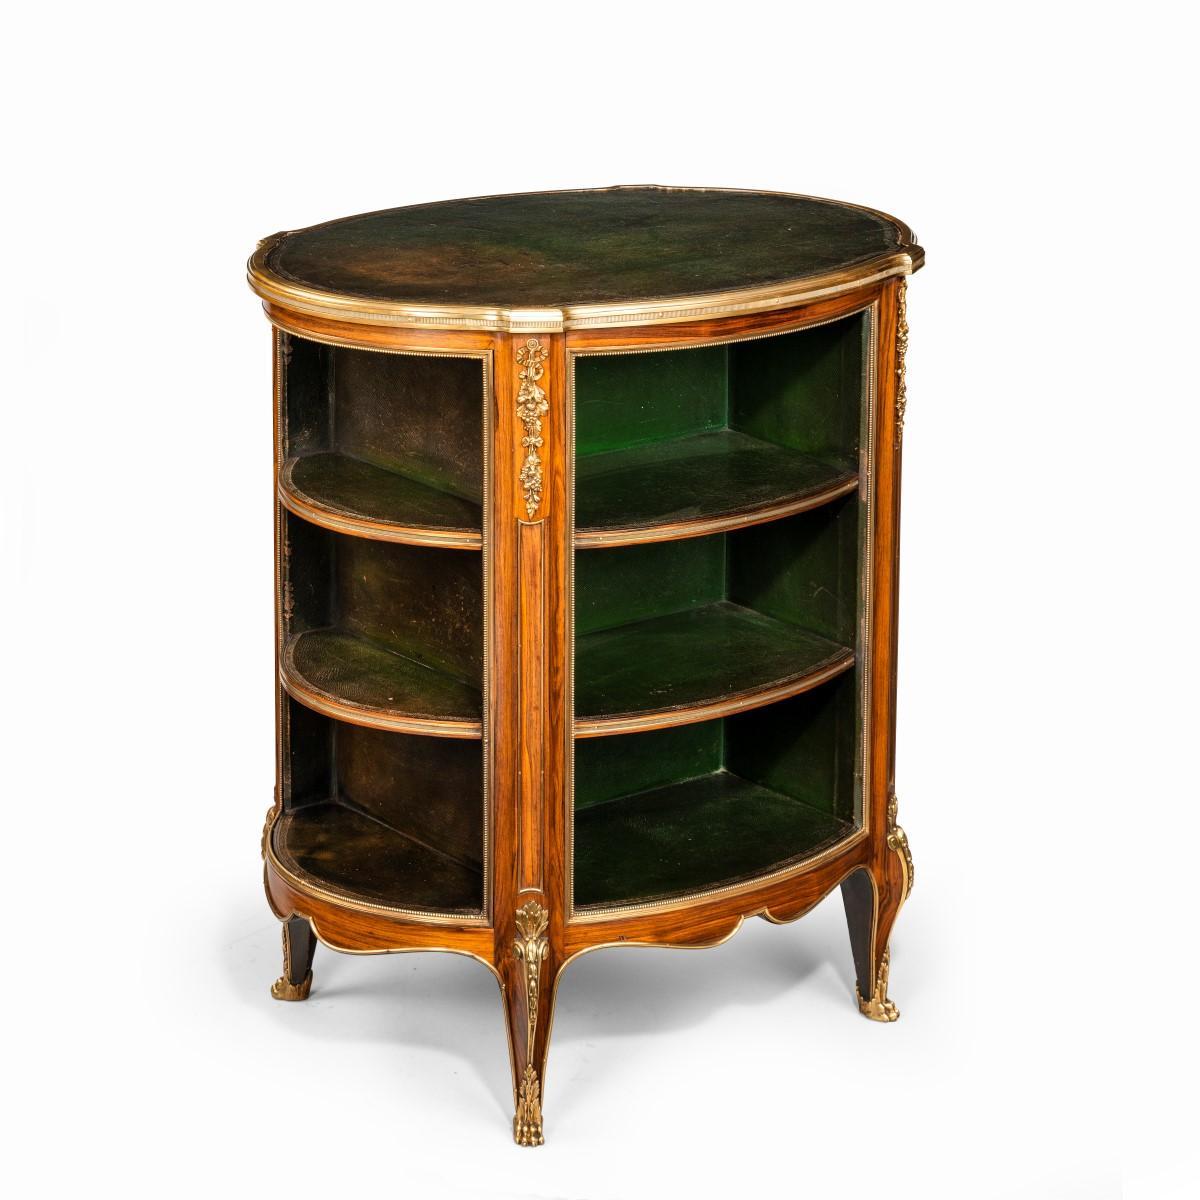 A Napoleon III kingwood freestanding open bookcase, of oval form with four angled, fluted pilasters, the top and three shelves covered with tooled green leather, applied with moulded ormolu edging and ribbon-tied garlands, all raised on cabriole